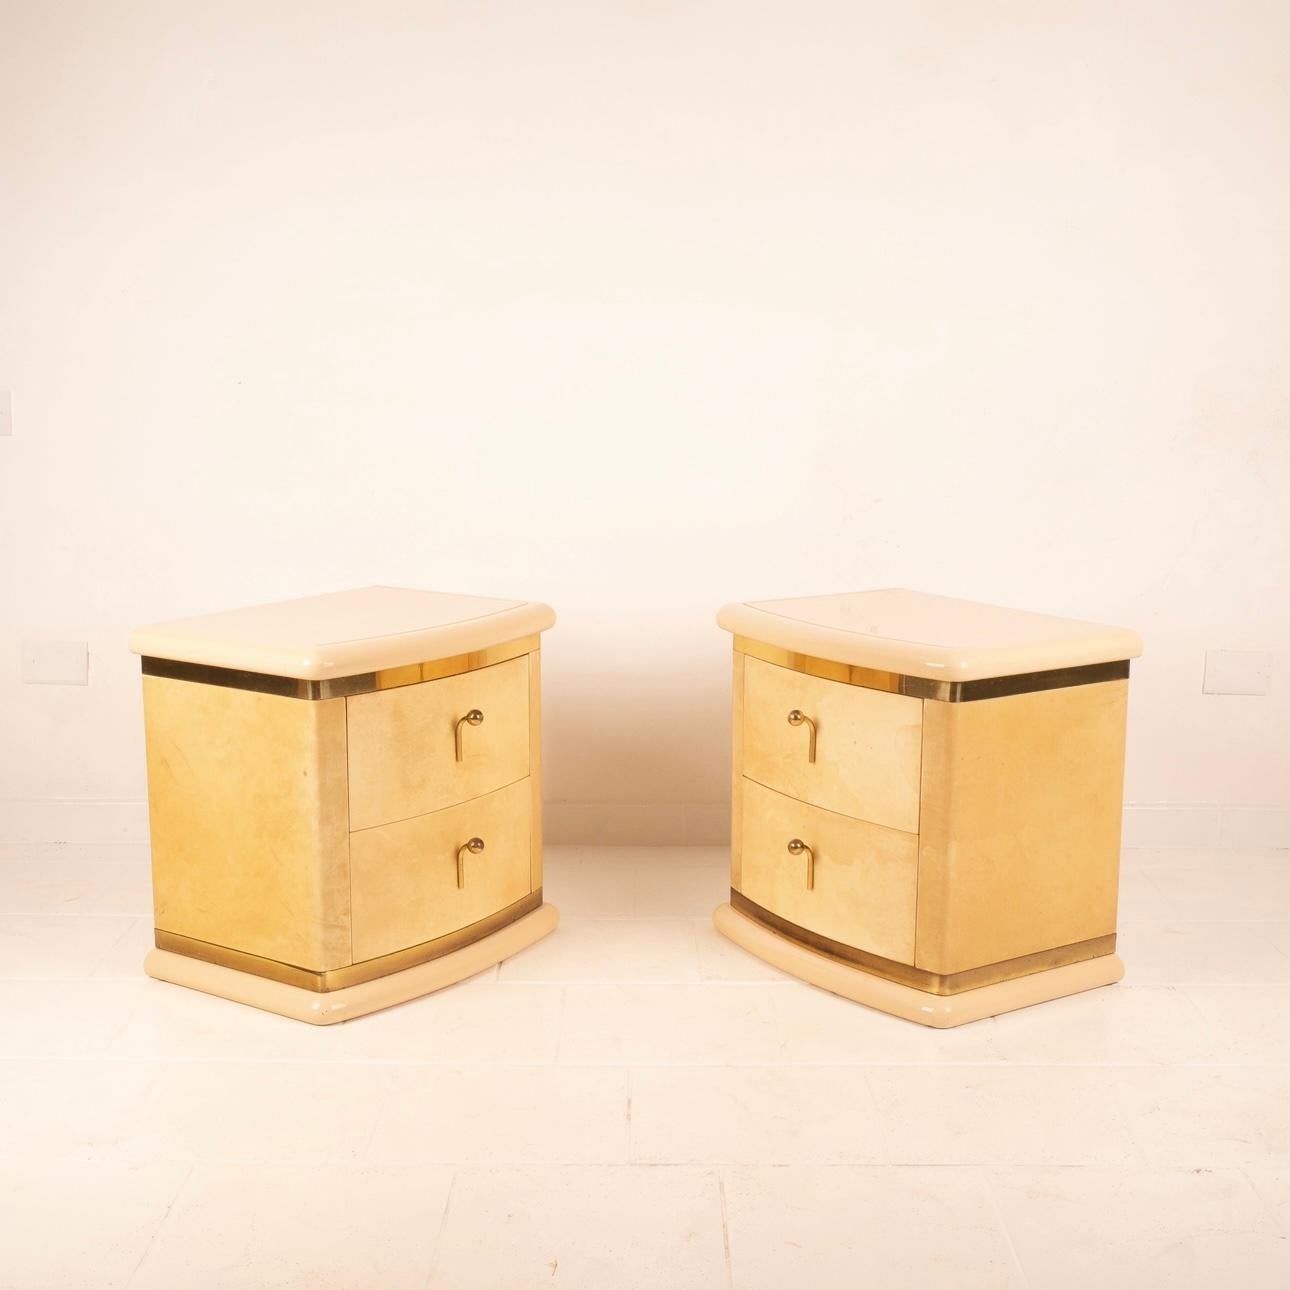 Extraordinary and very rare pair of curved nightstands designed by Aldo Tura and made by the Tura Milano company of the same name.
These two exceptional pieces represent the pinnacle of Italian craftsmanship in the 1960s.
Upholstered completely in